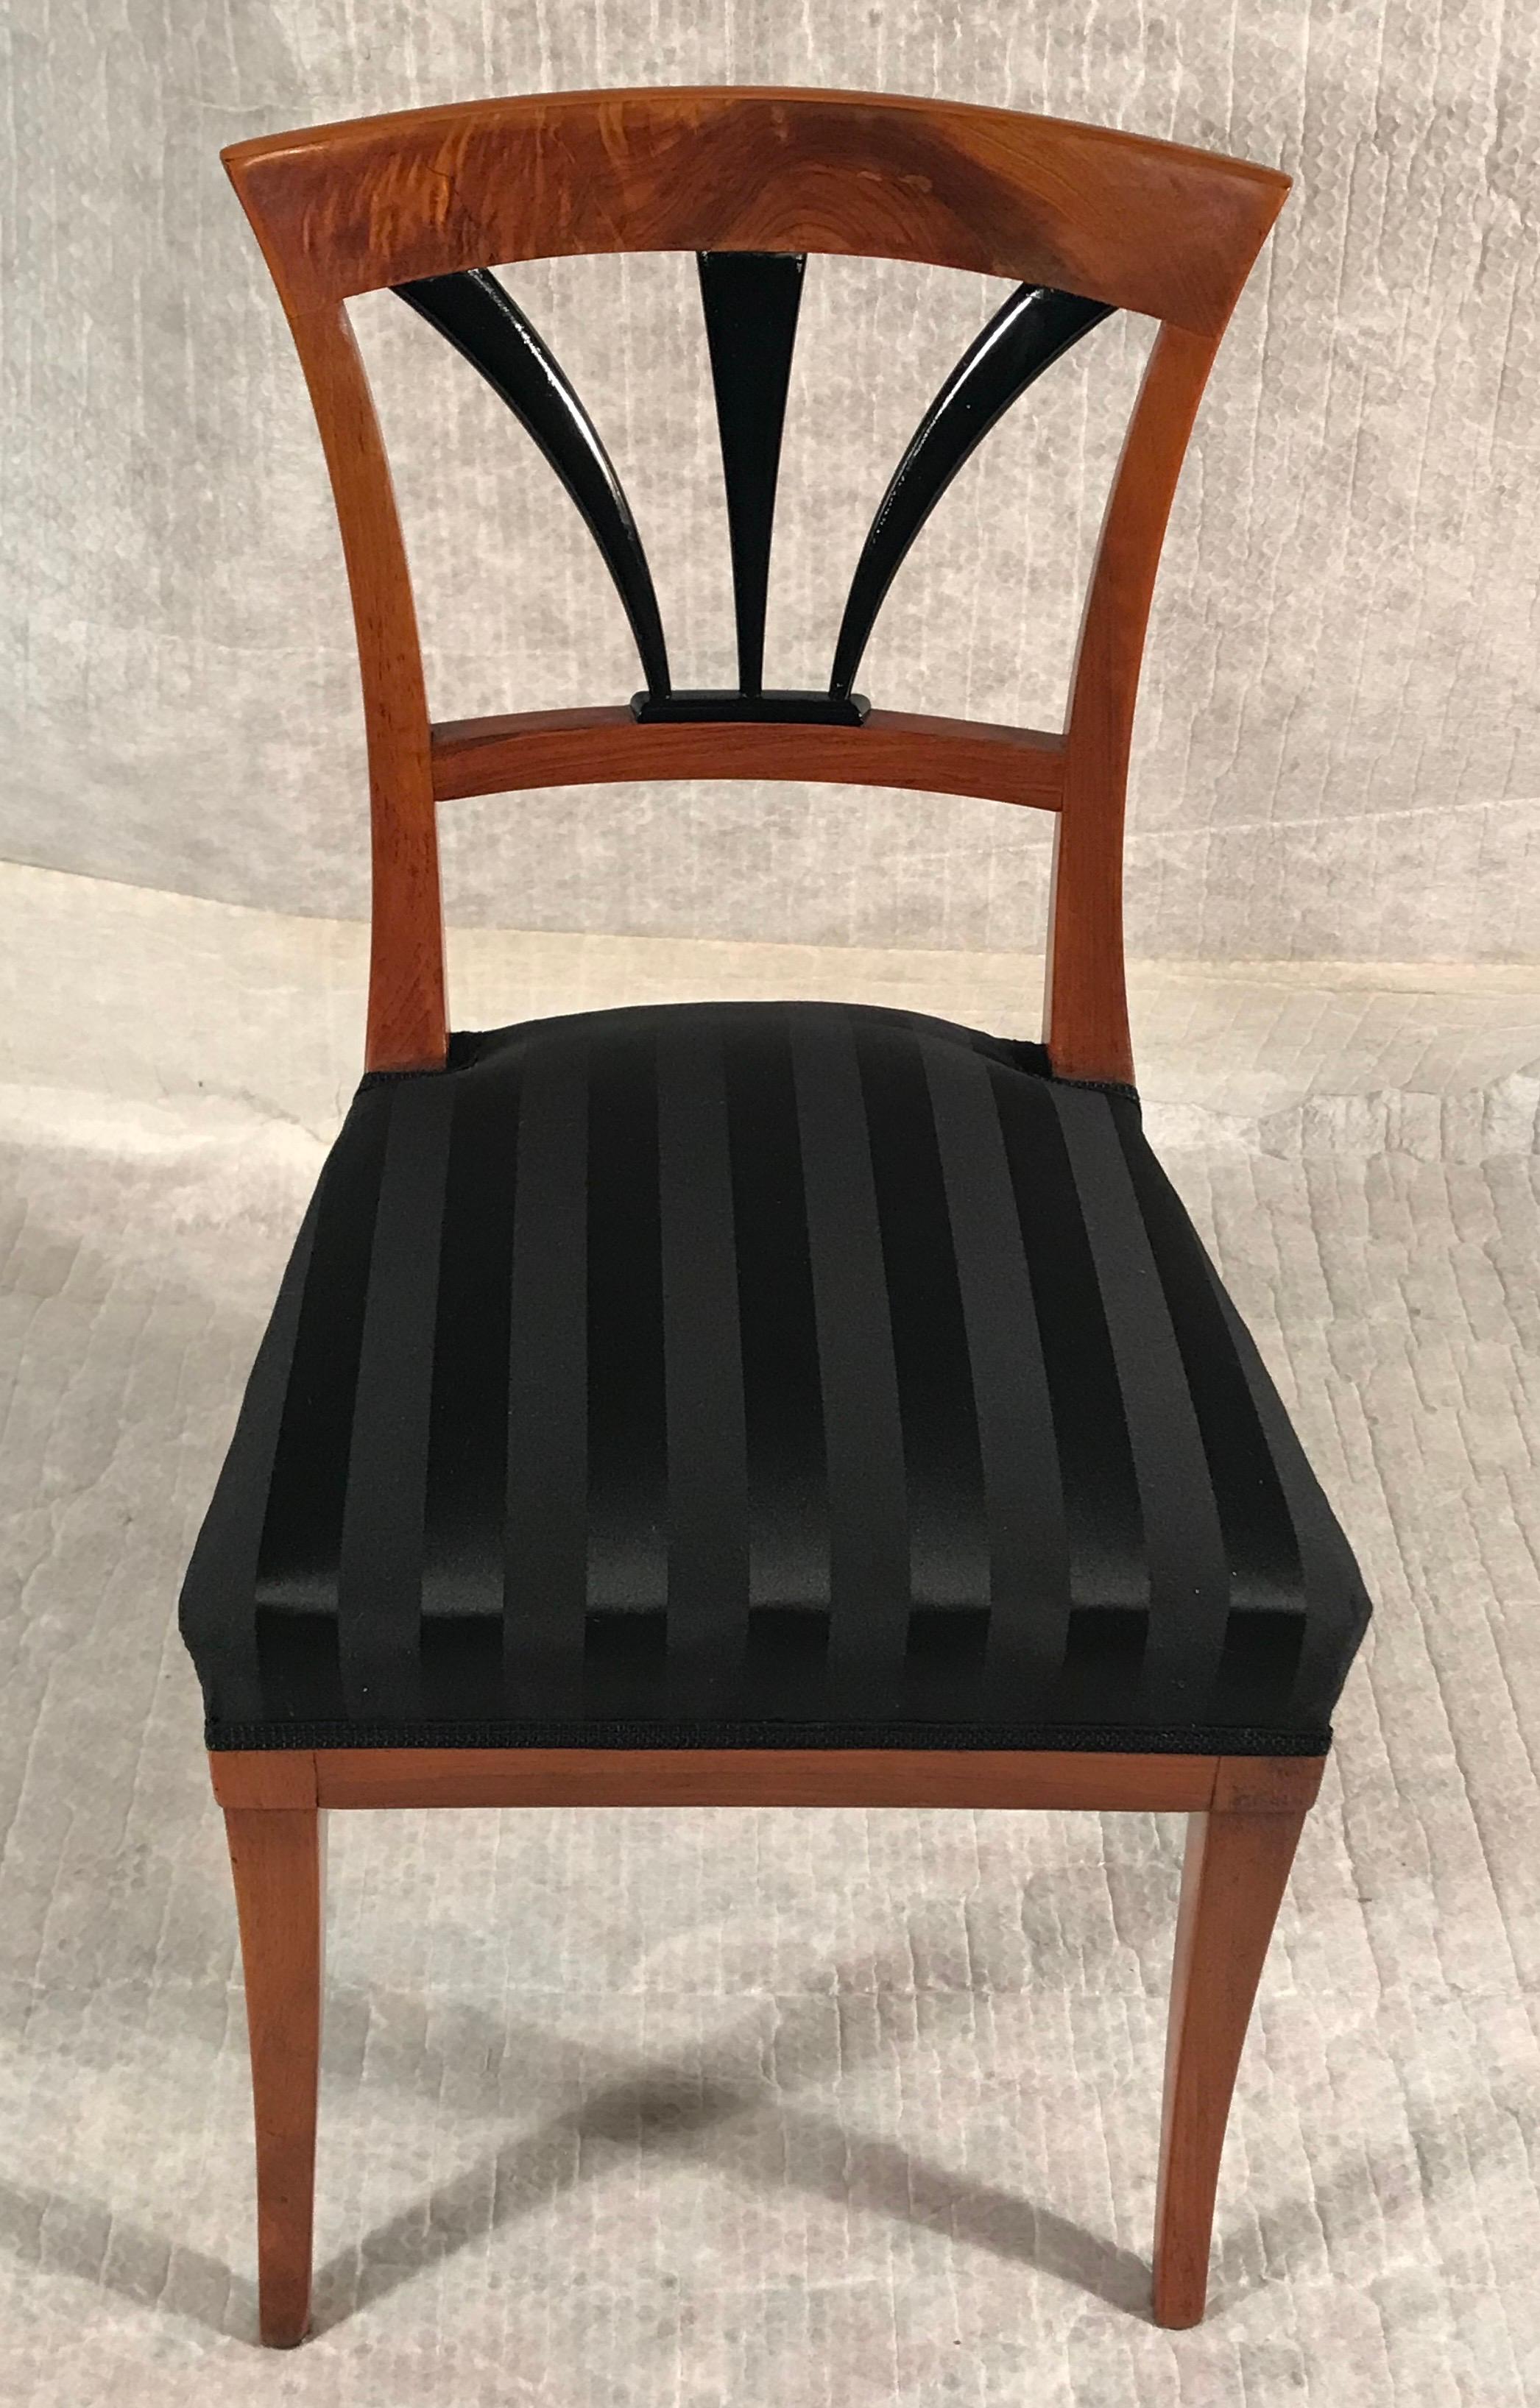 This set of four Biedermeier Chairs is a very pretty example of the elegance of Biedermeier chair design. The walnut veneered chairs have a a classic back decor with ebonized details. The come fully refinished with a newly added elegant black JAB